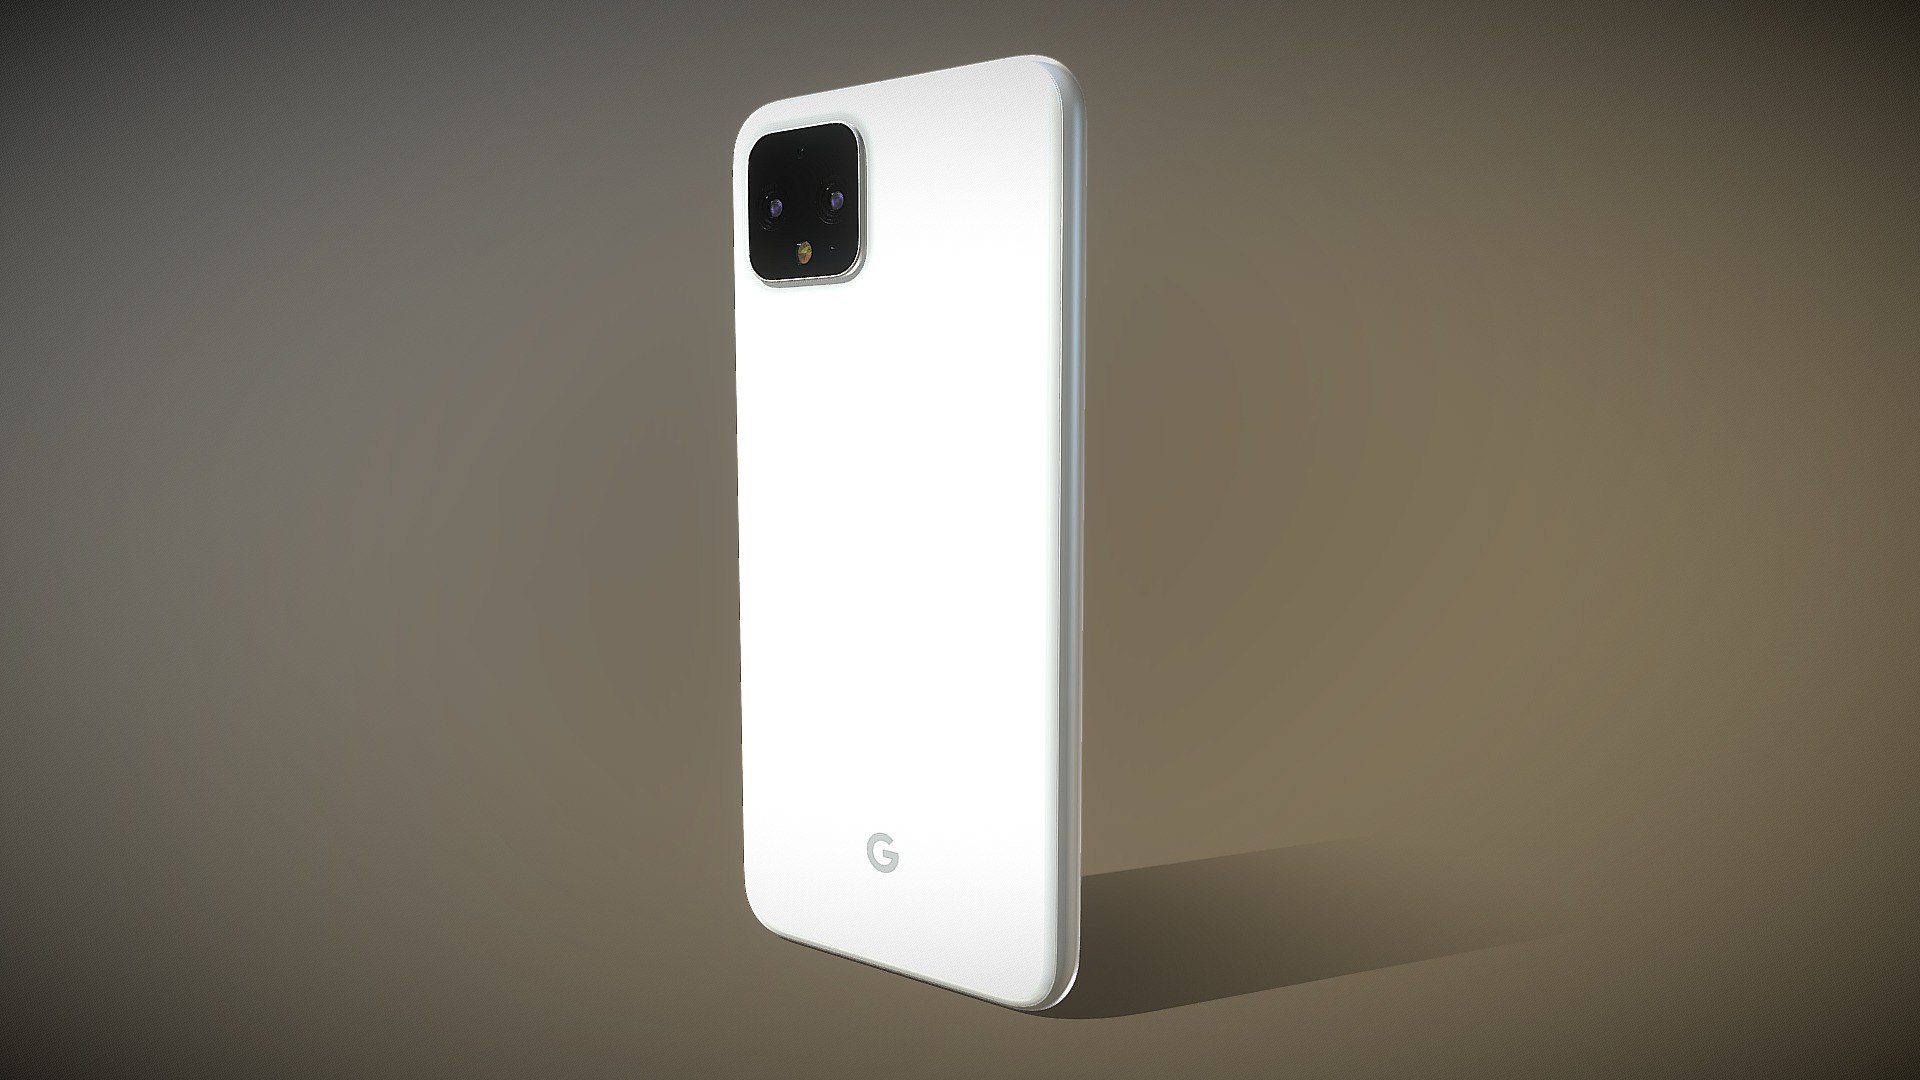 3D model Google Pixel 4 smartphone - This is a 3D model of the Google Pixel 4 smartphone. The 3D model is about a white rectangular object with a black circle on it.